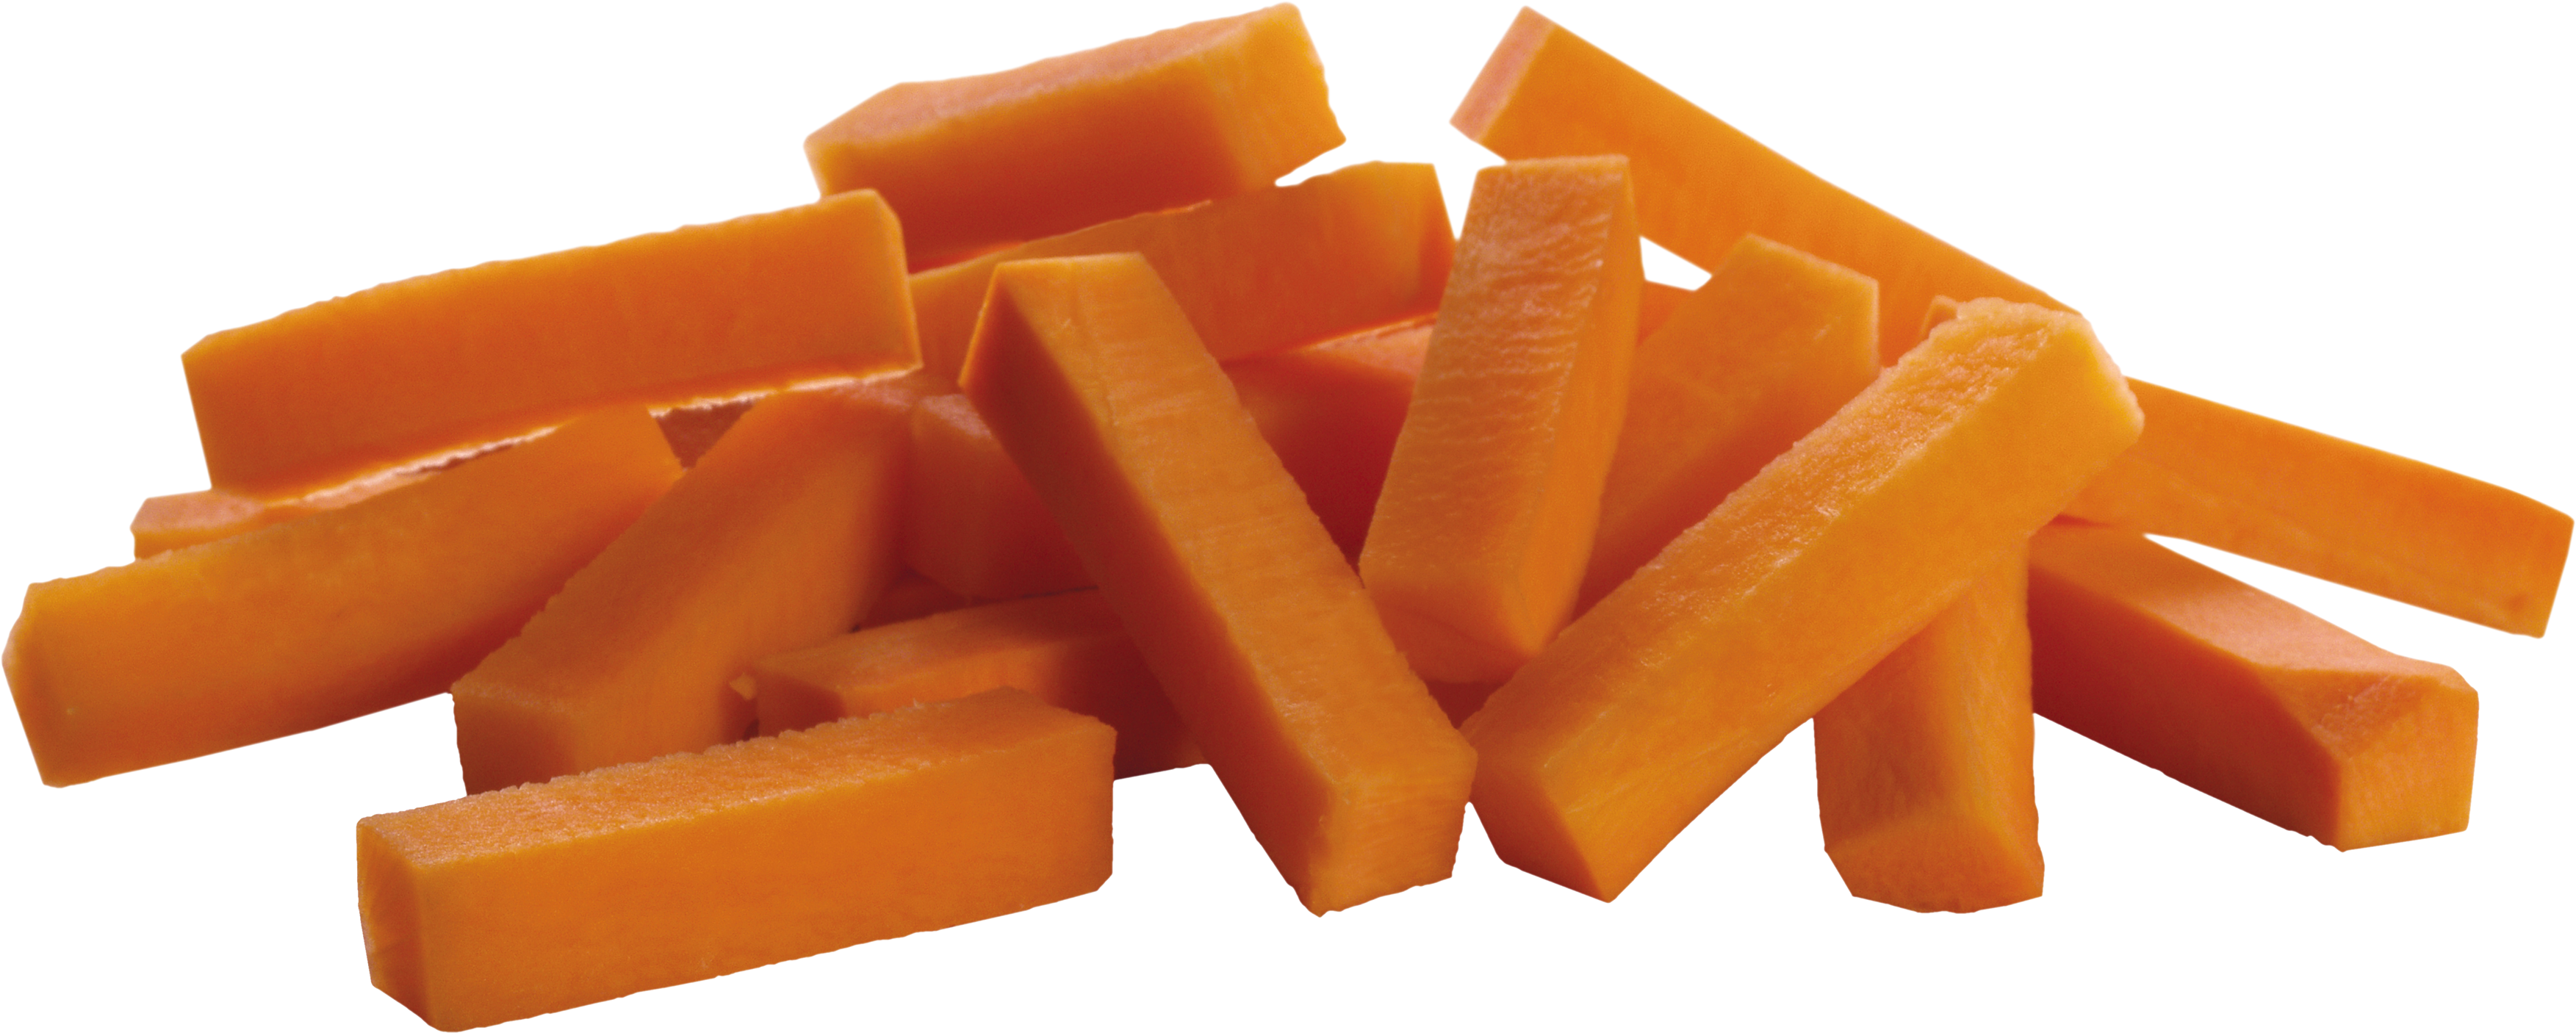 Slice Carrot Slices PNG Image